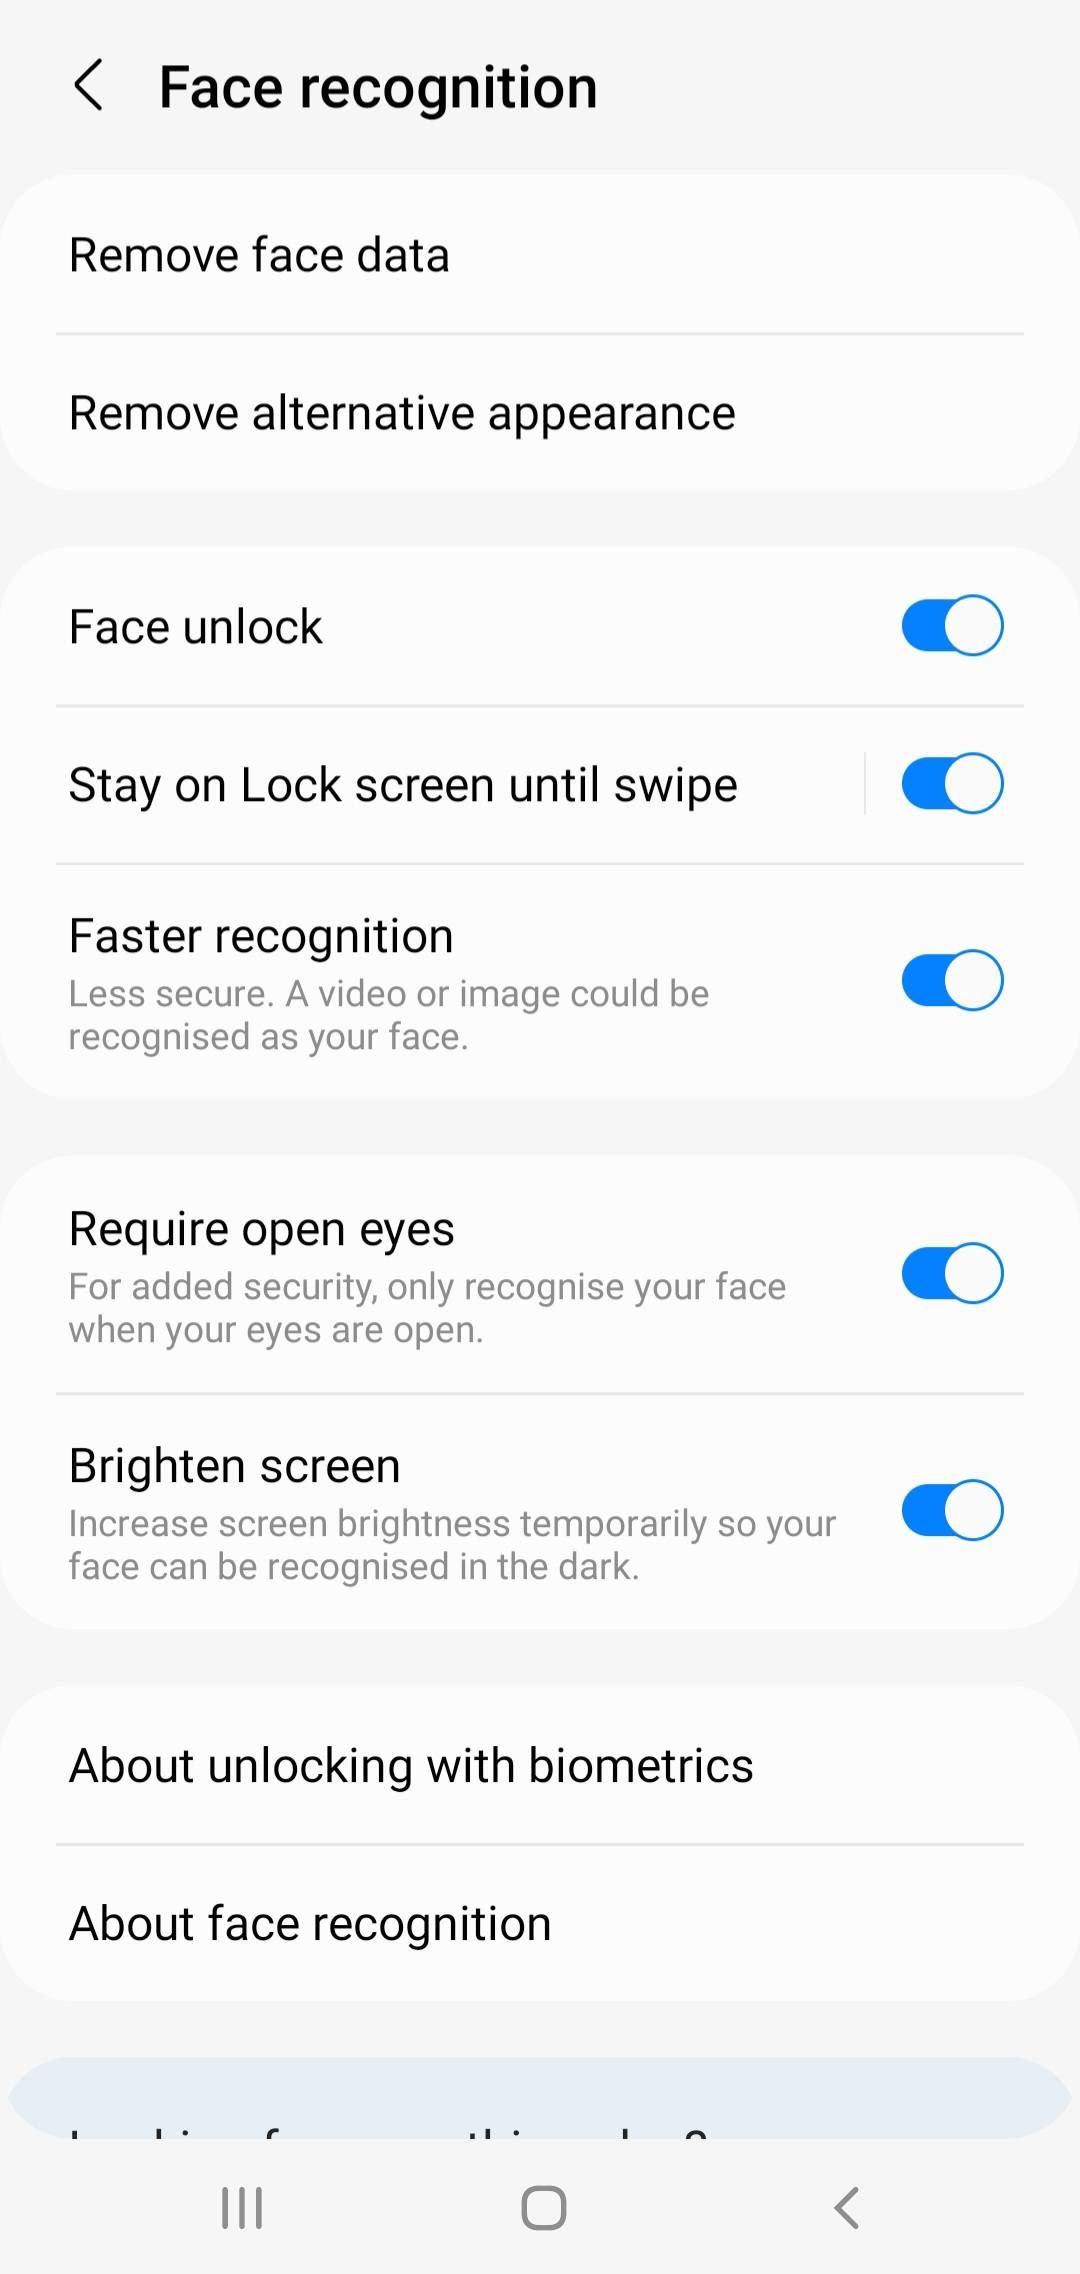 S21 face recognition is worse than a budget phone - Samsung Community